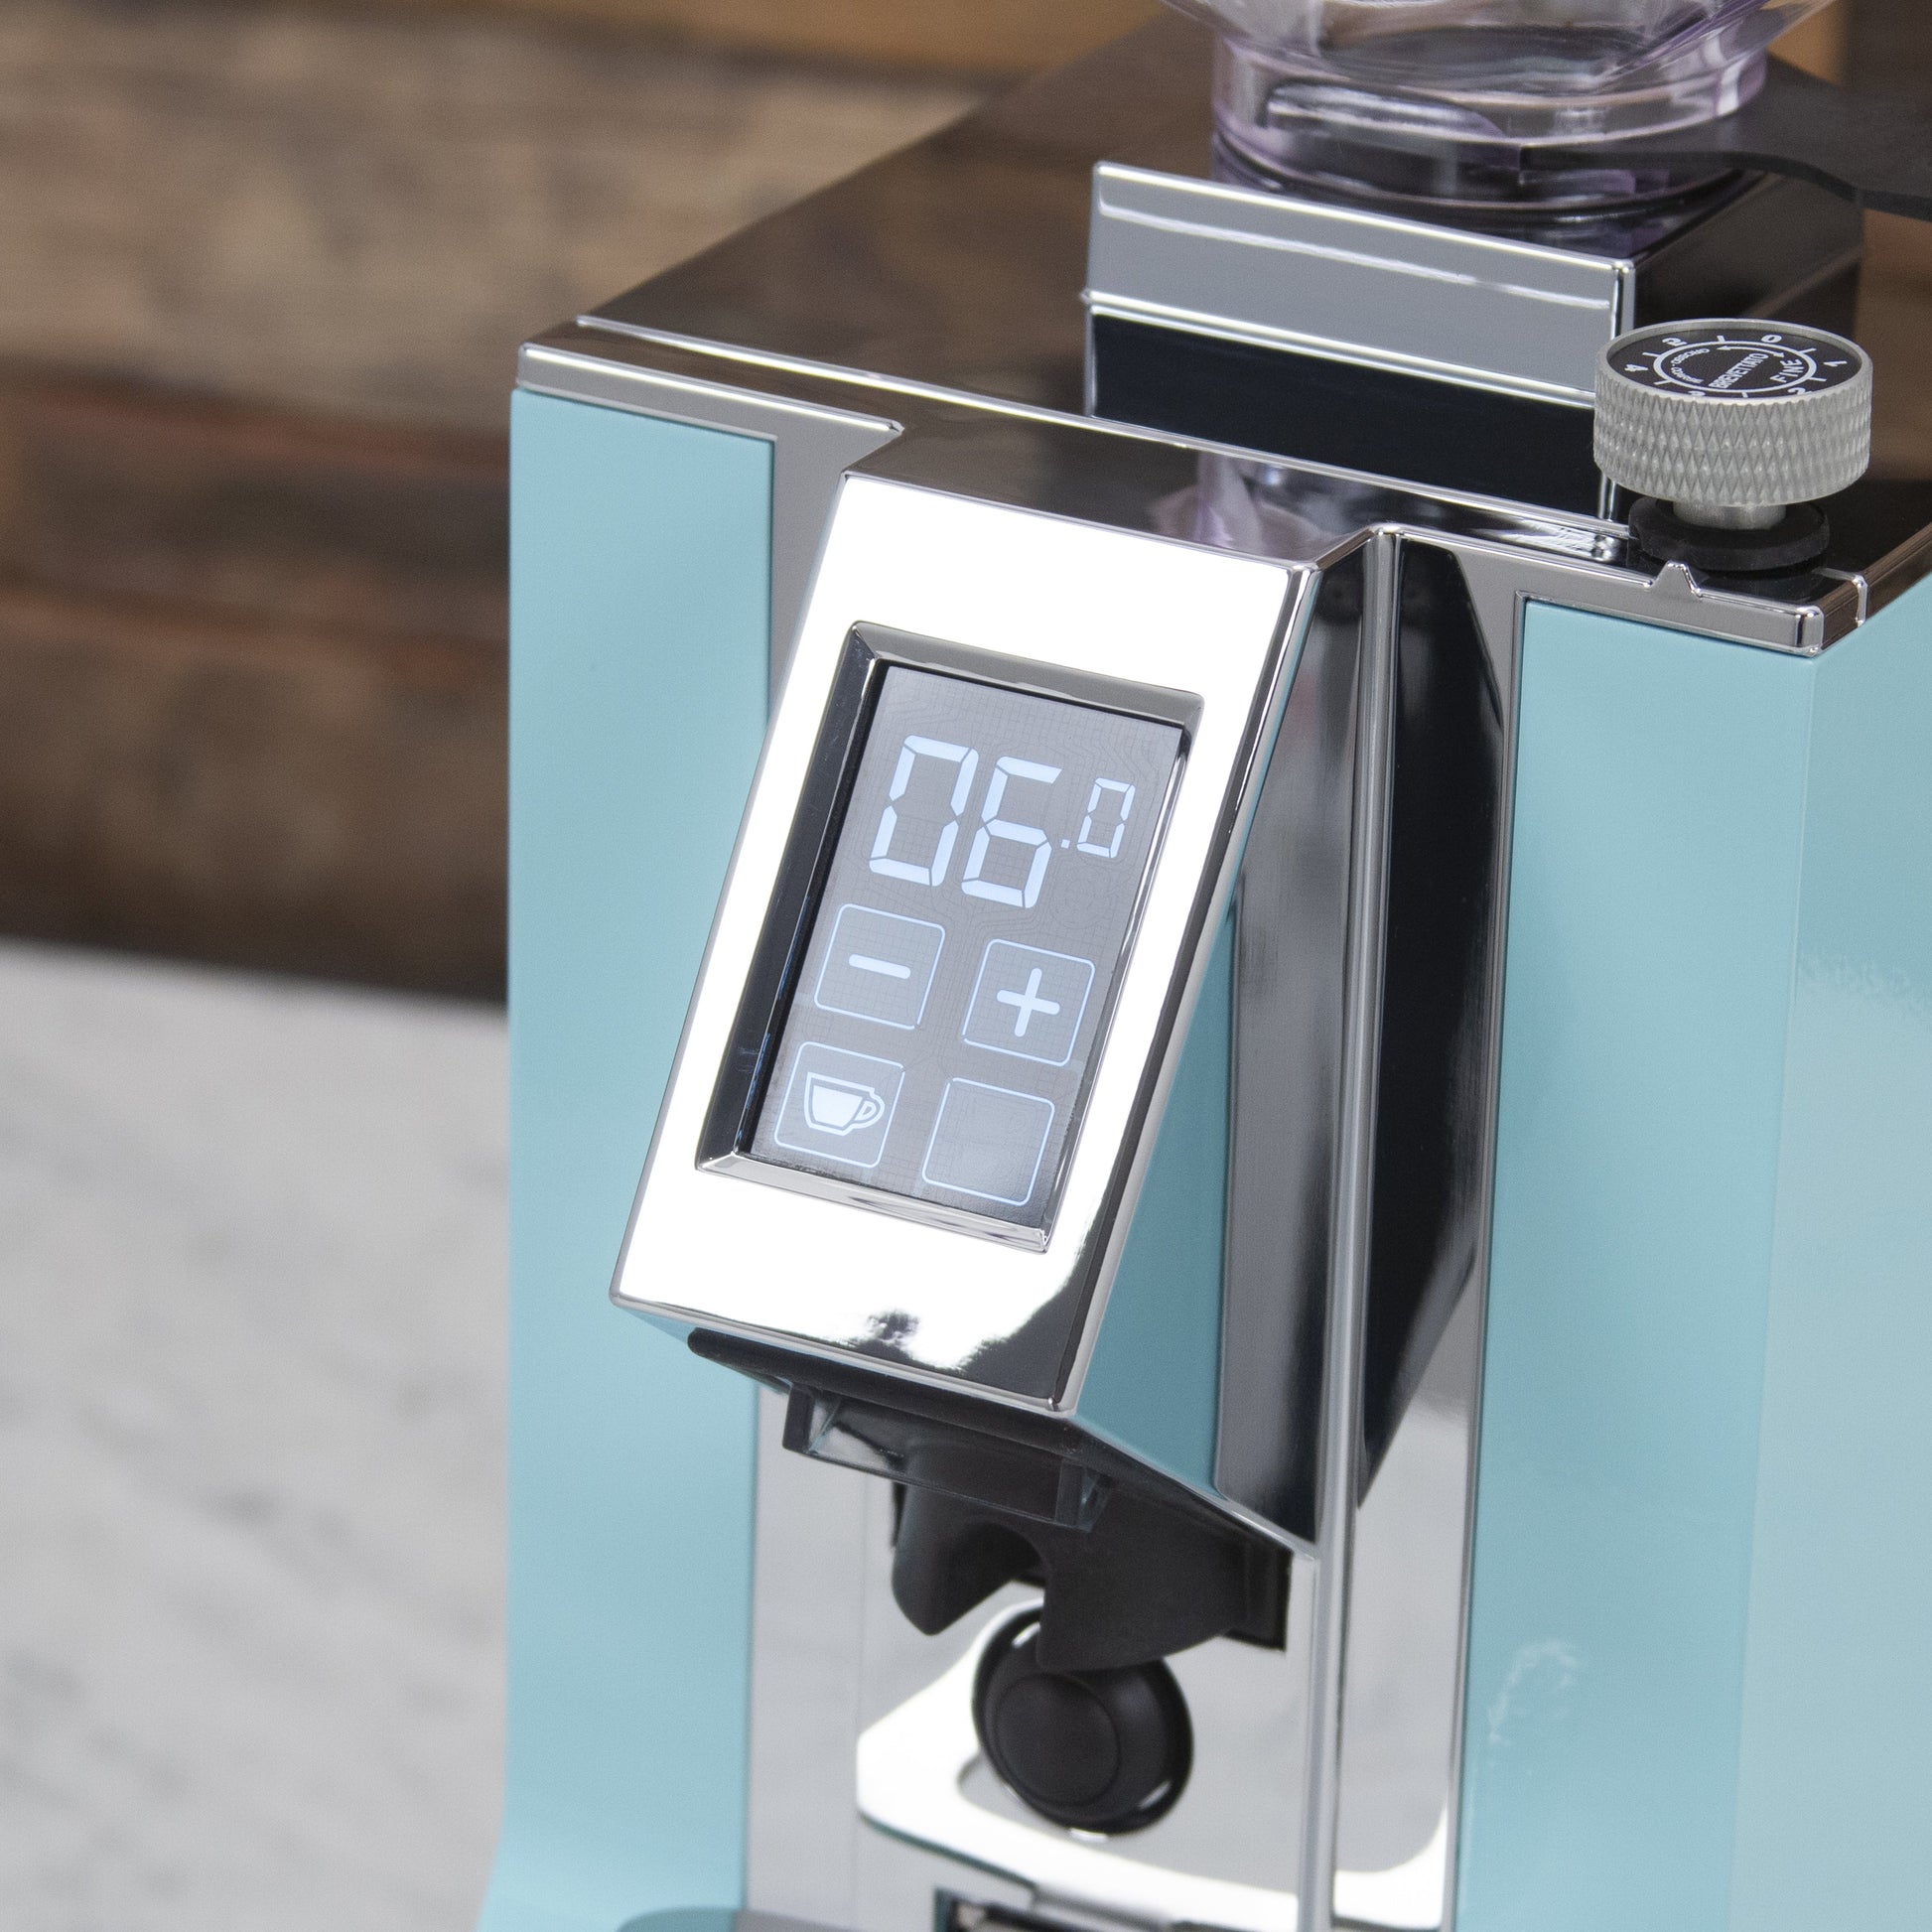 Eureka Mignon Magnifico Coffee Grinder in Tiffany Blue Touch Screen || tiffany blue